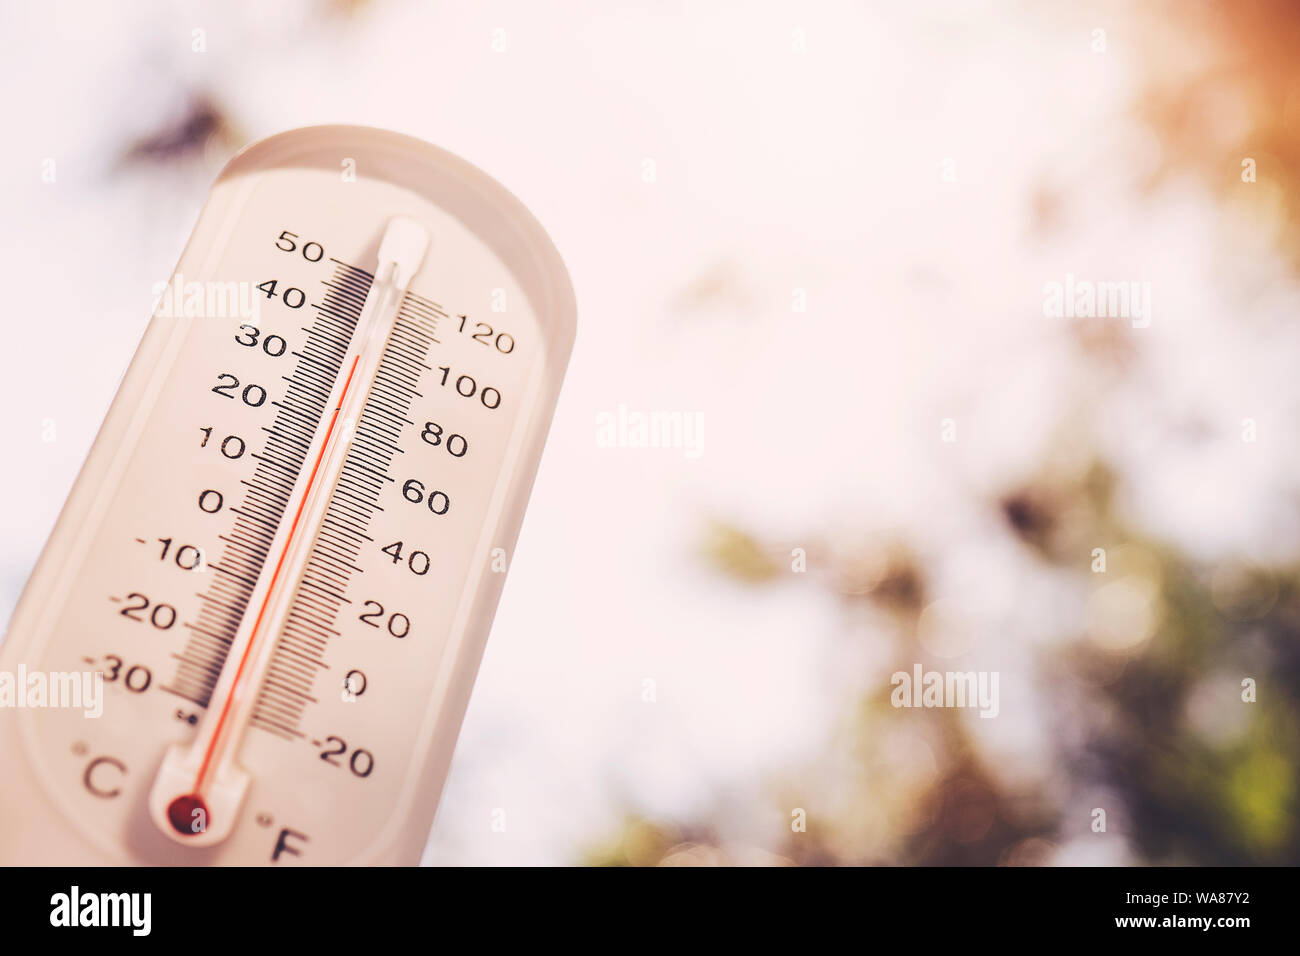 https://c8.alamy.com/comp/WA87Y2/heat-thermometer-shows-the-temperature-is-hot-in-the-sky-summer-WA87Y2.jpg